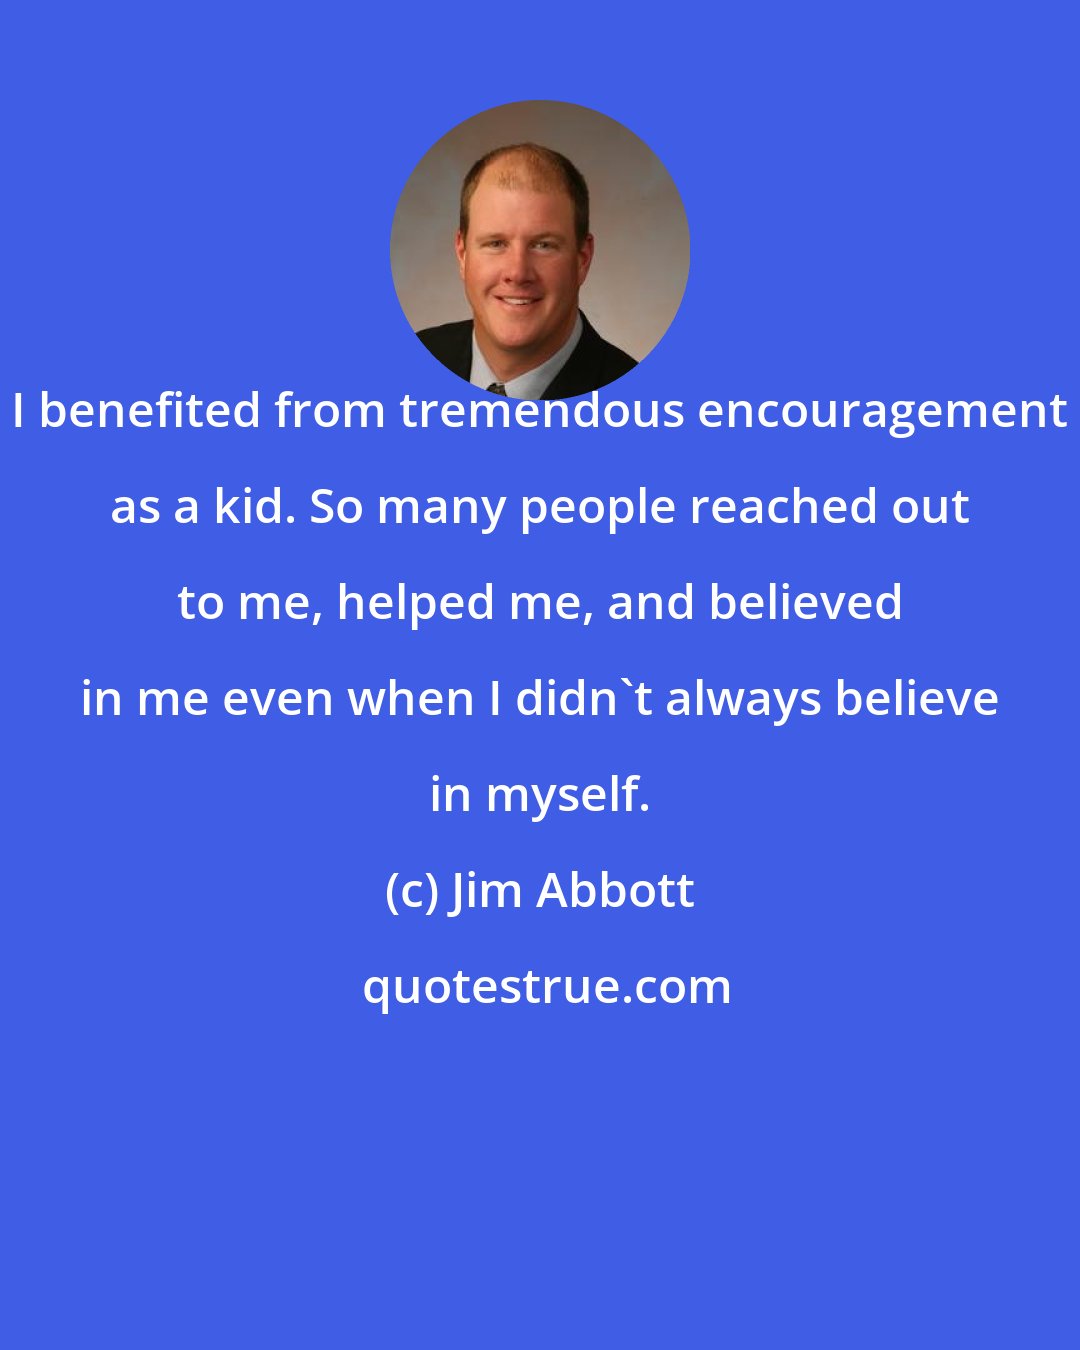 Jim Abbott: I benefited from tremendous encouragement as a kid. So many people reached out to me, helped me, and believed in me even when I didn't always believe in myself.